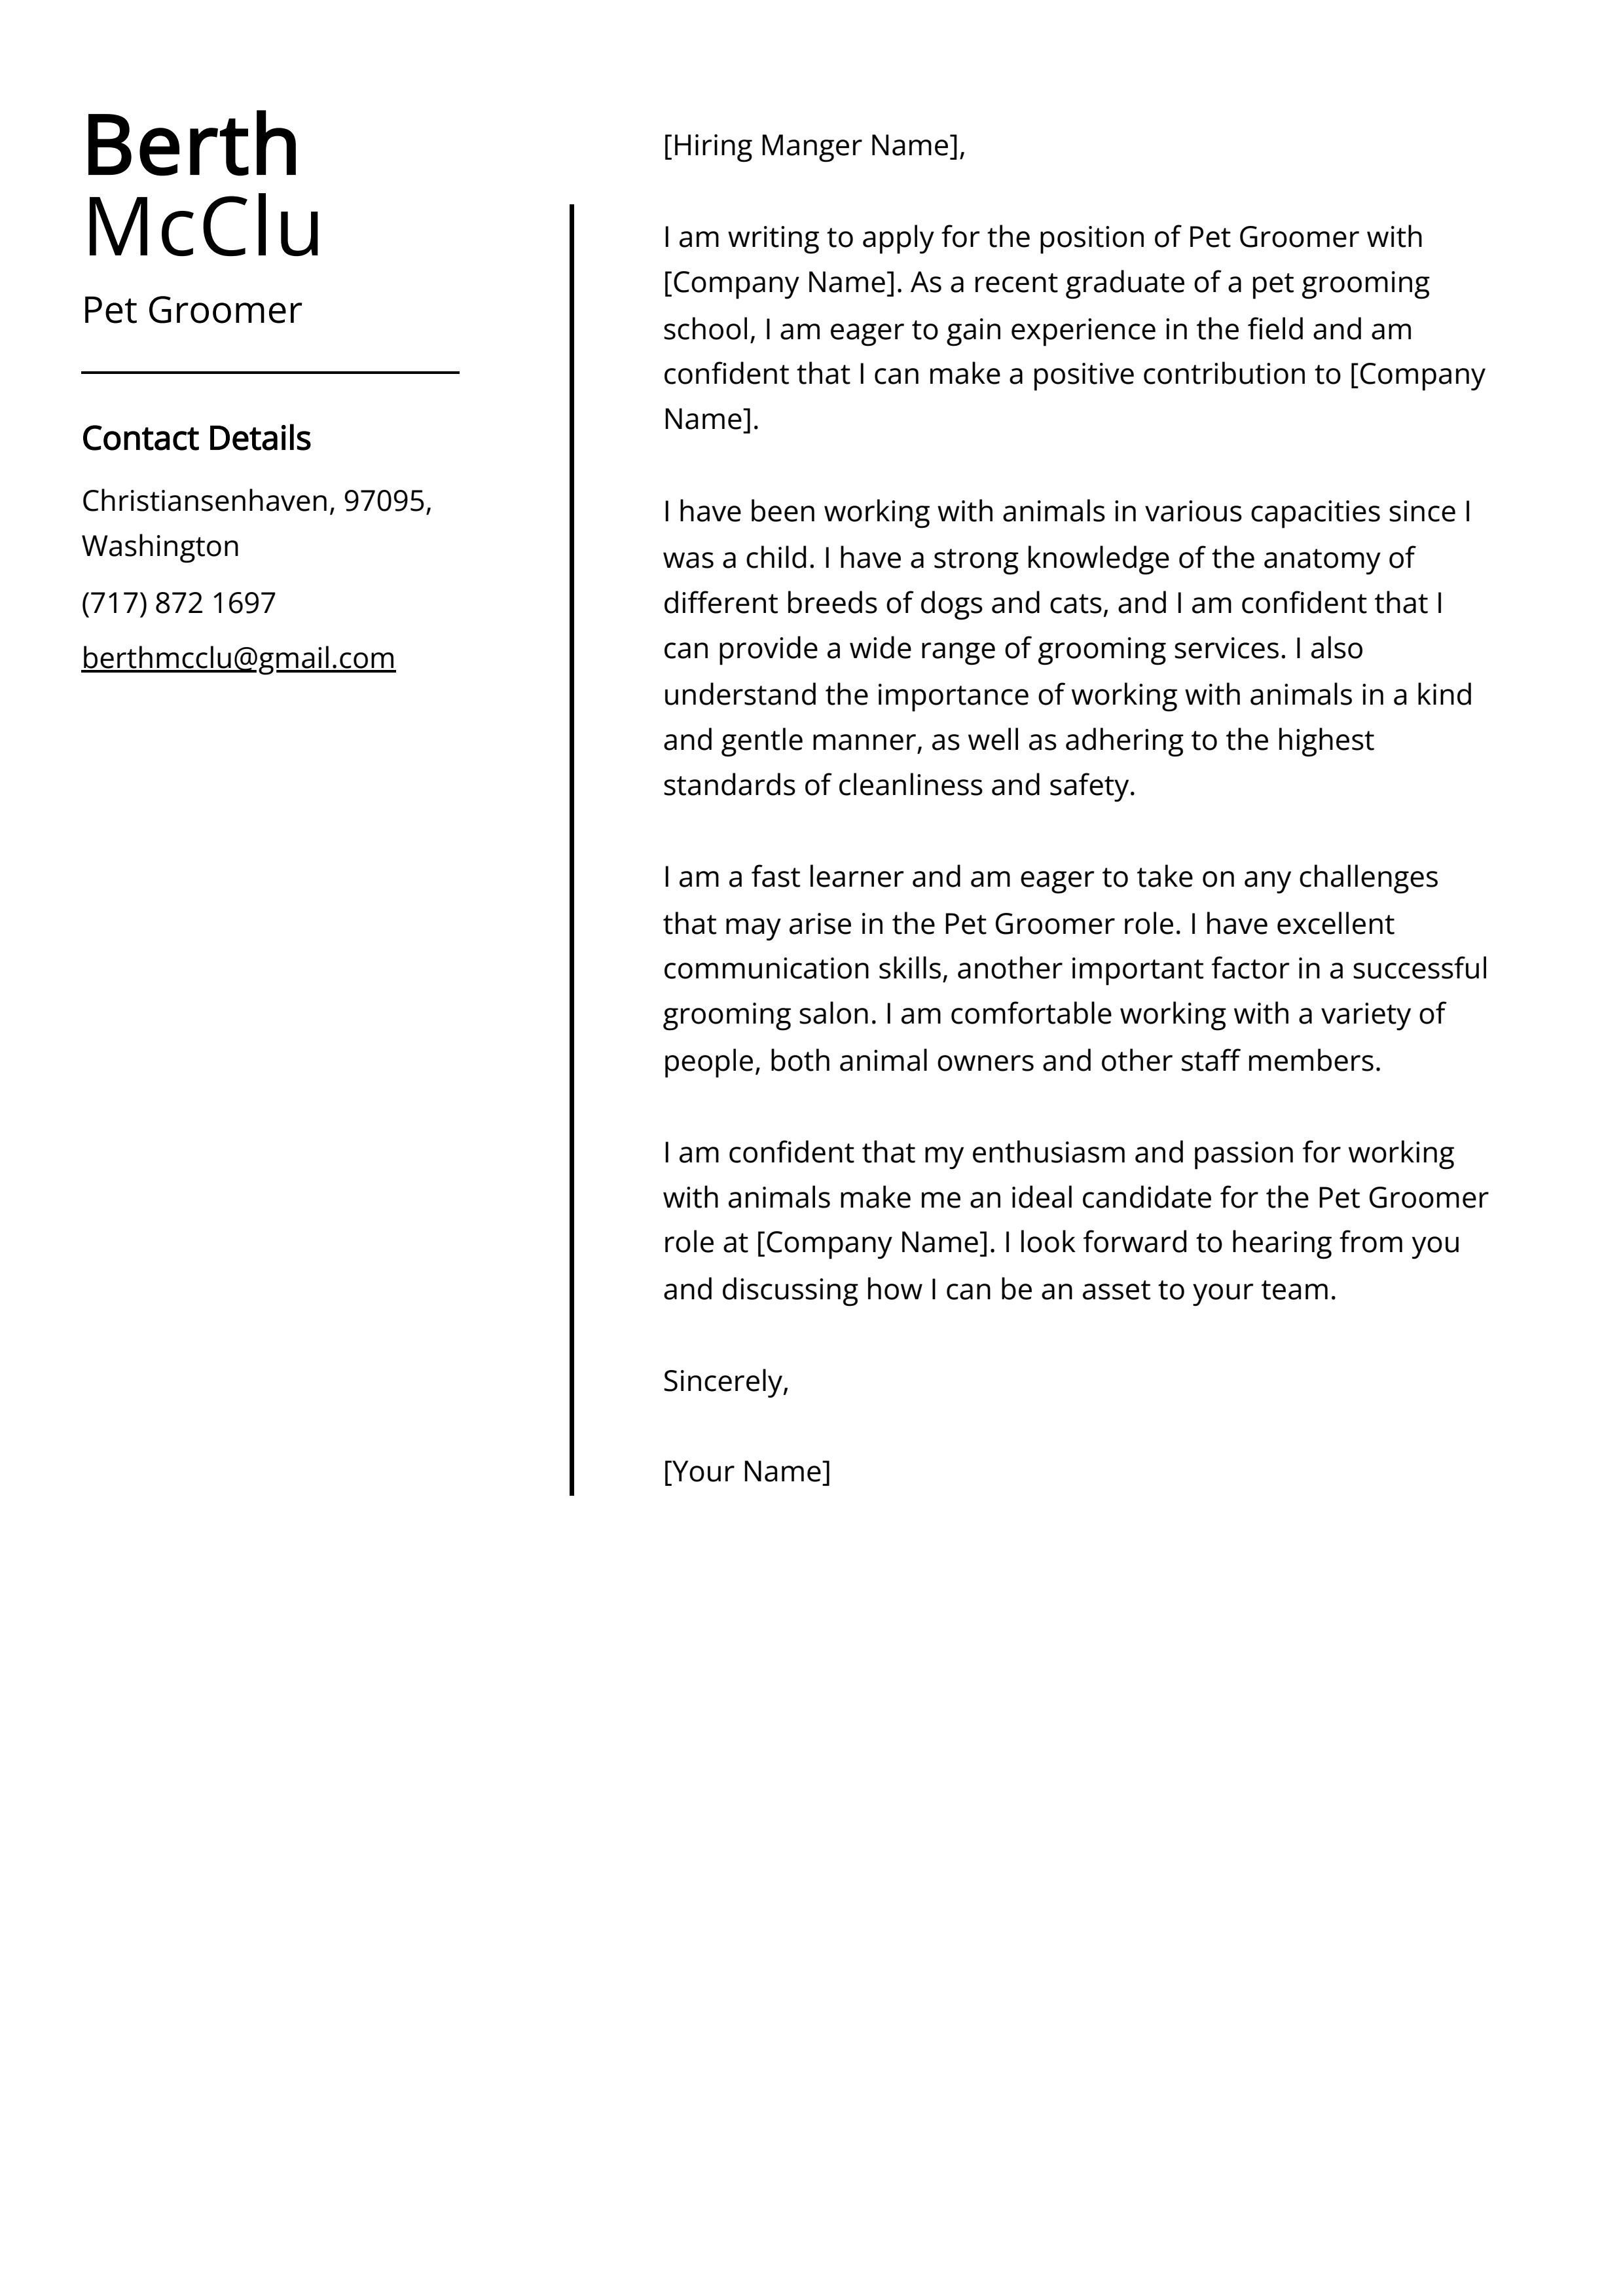 Pet Groomer Cover Letter Example